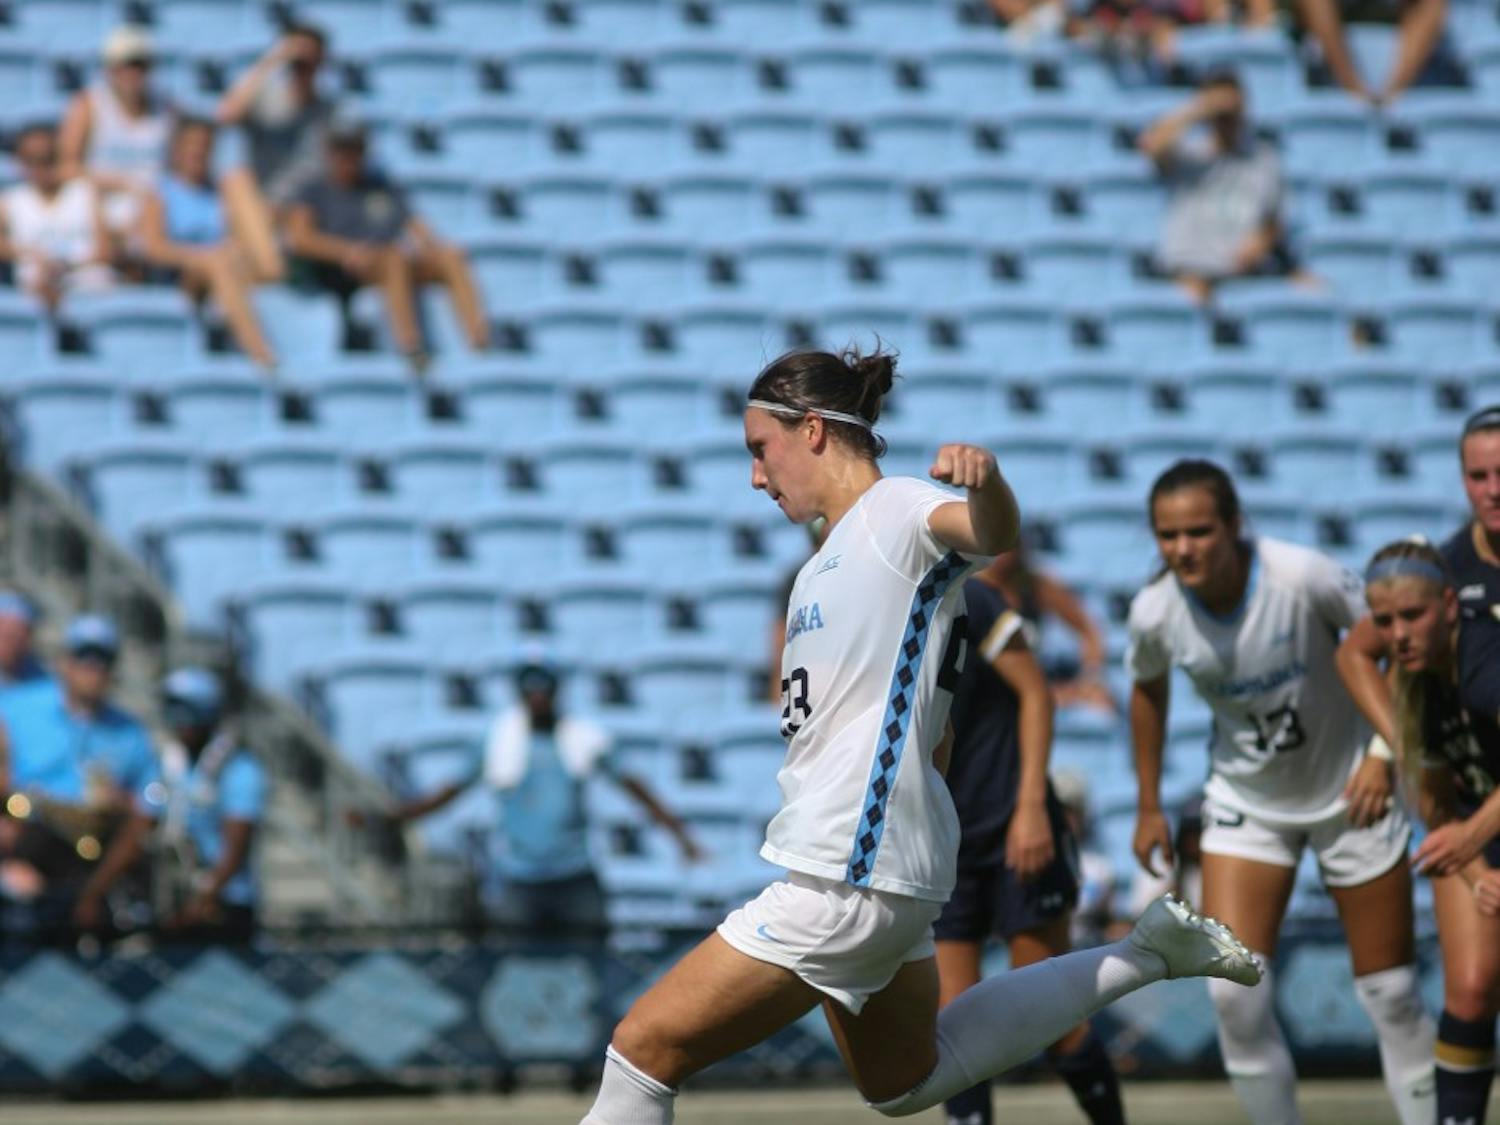 UNC defender Lotte Wubben-Moy (23) shoots a penalty kick in the final minutes of the soccer game against the Notre Dame Fighting Irish on Sunday, Sept. 29th, 2019 at Dorrance Field. The Tar Heels beat the Fighting Irish 3-0 to advance to a 10-1 record on the season.